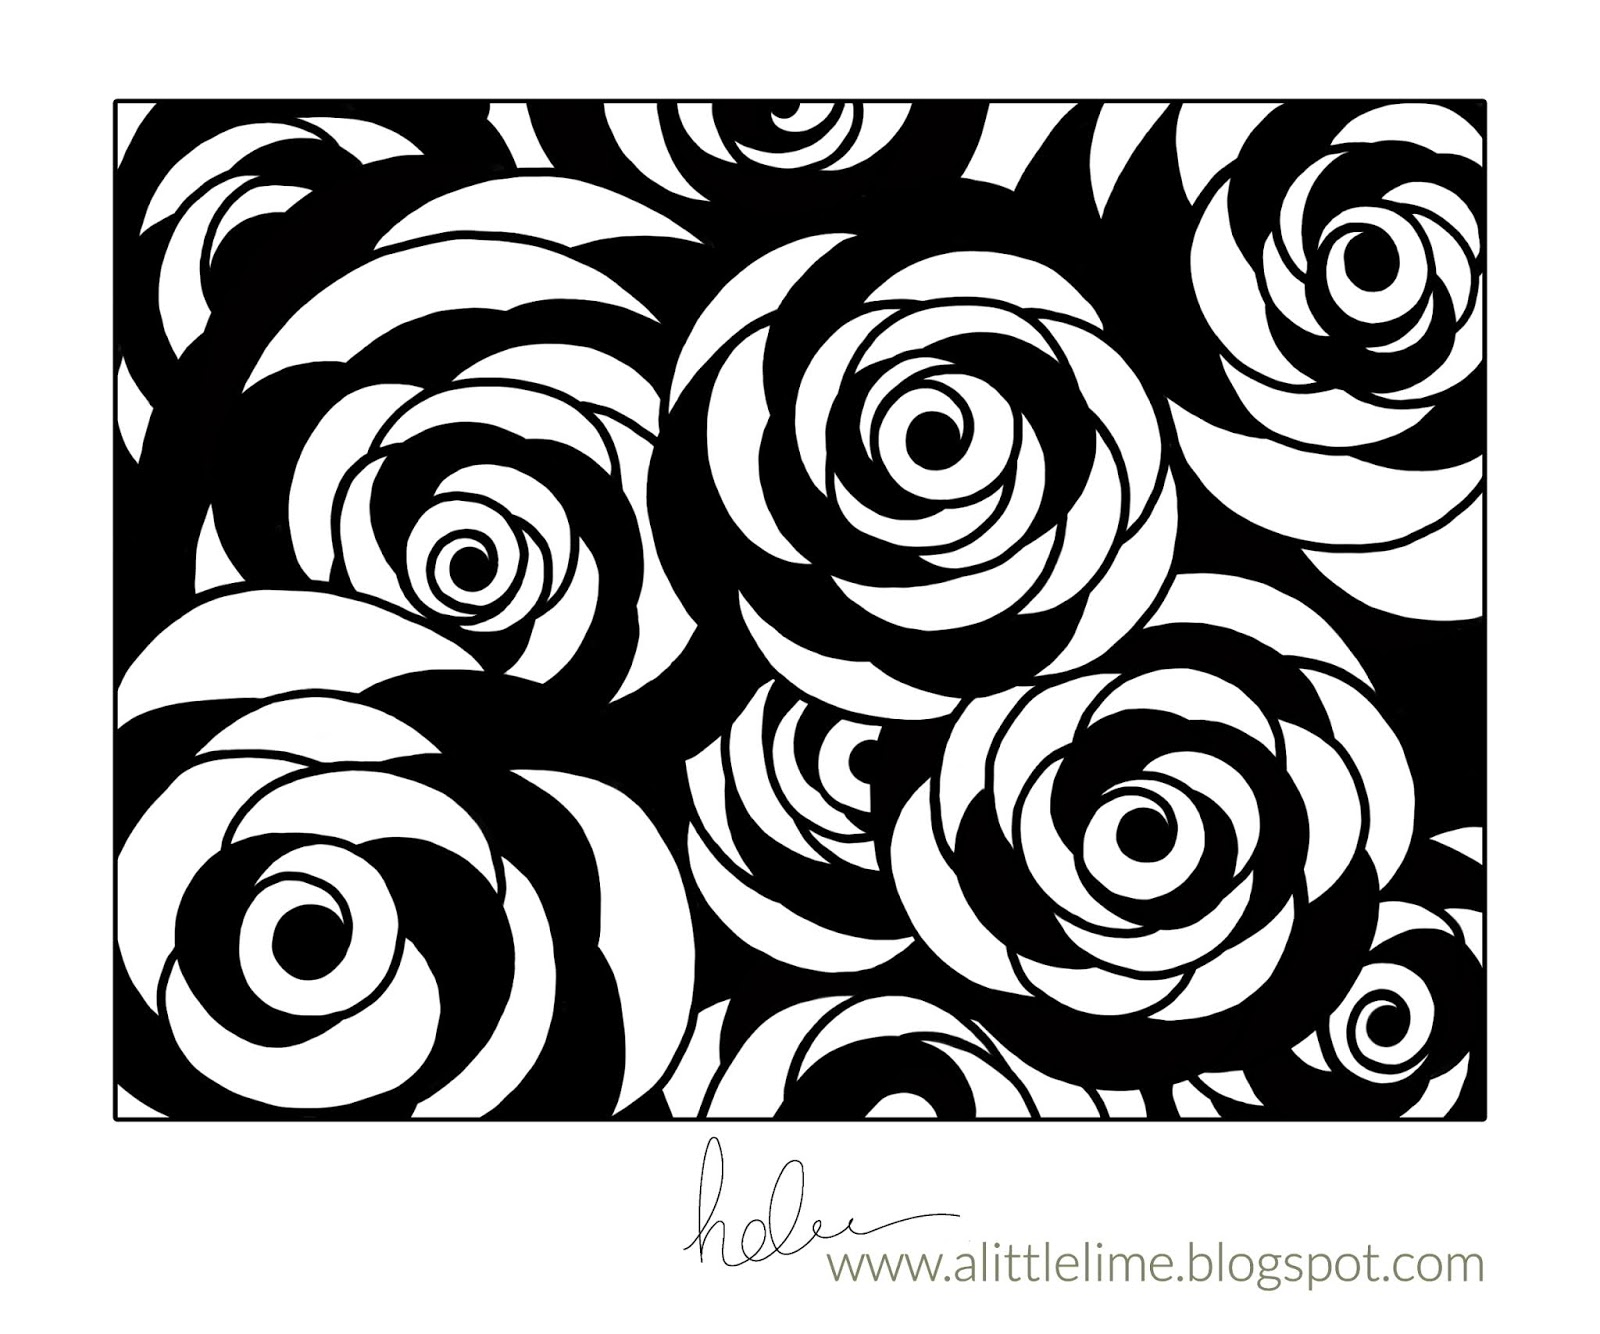 Wrapped Rose Tangle PATTERN and VIDEO